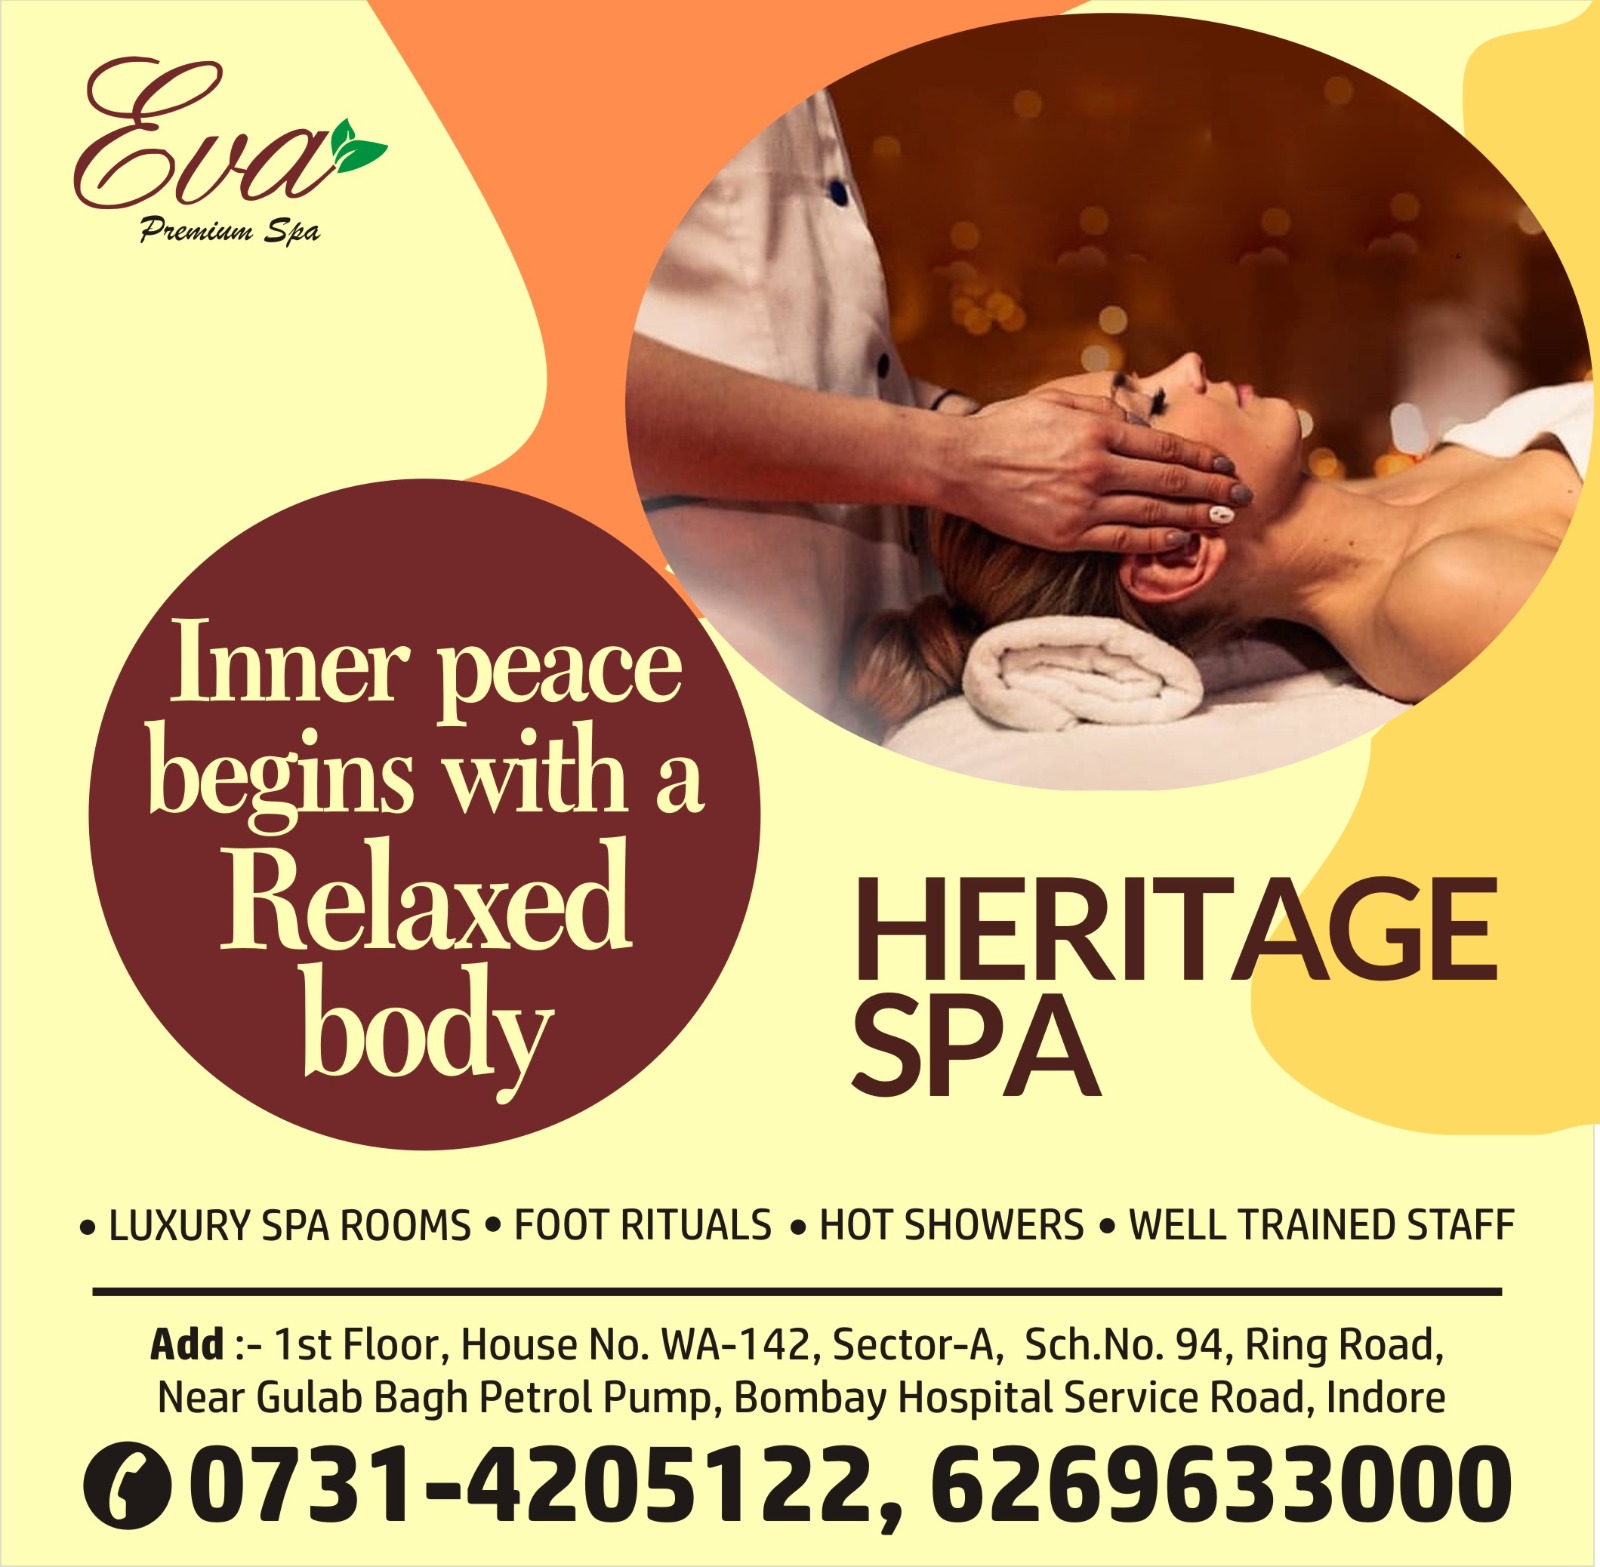 Best Heritage Spa Services in Indore